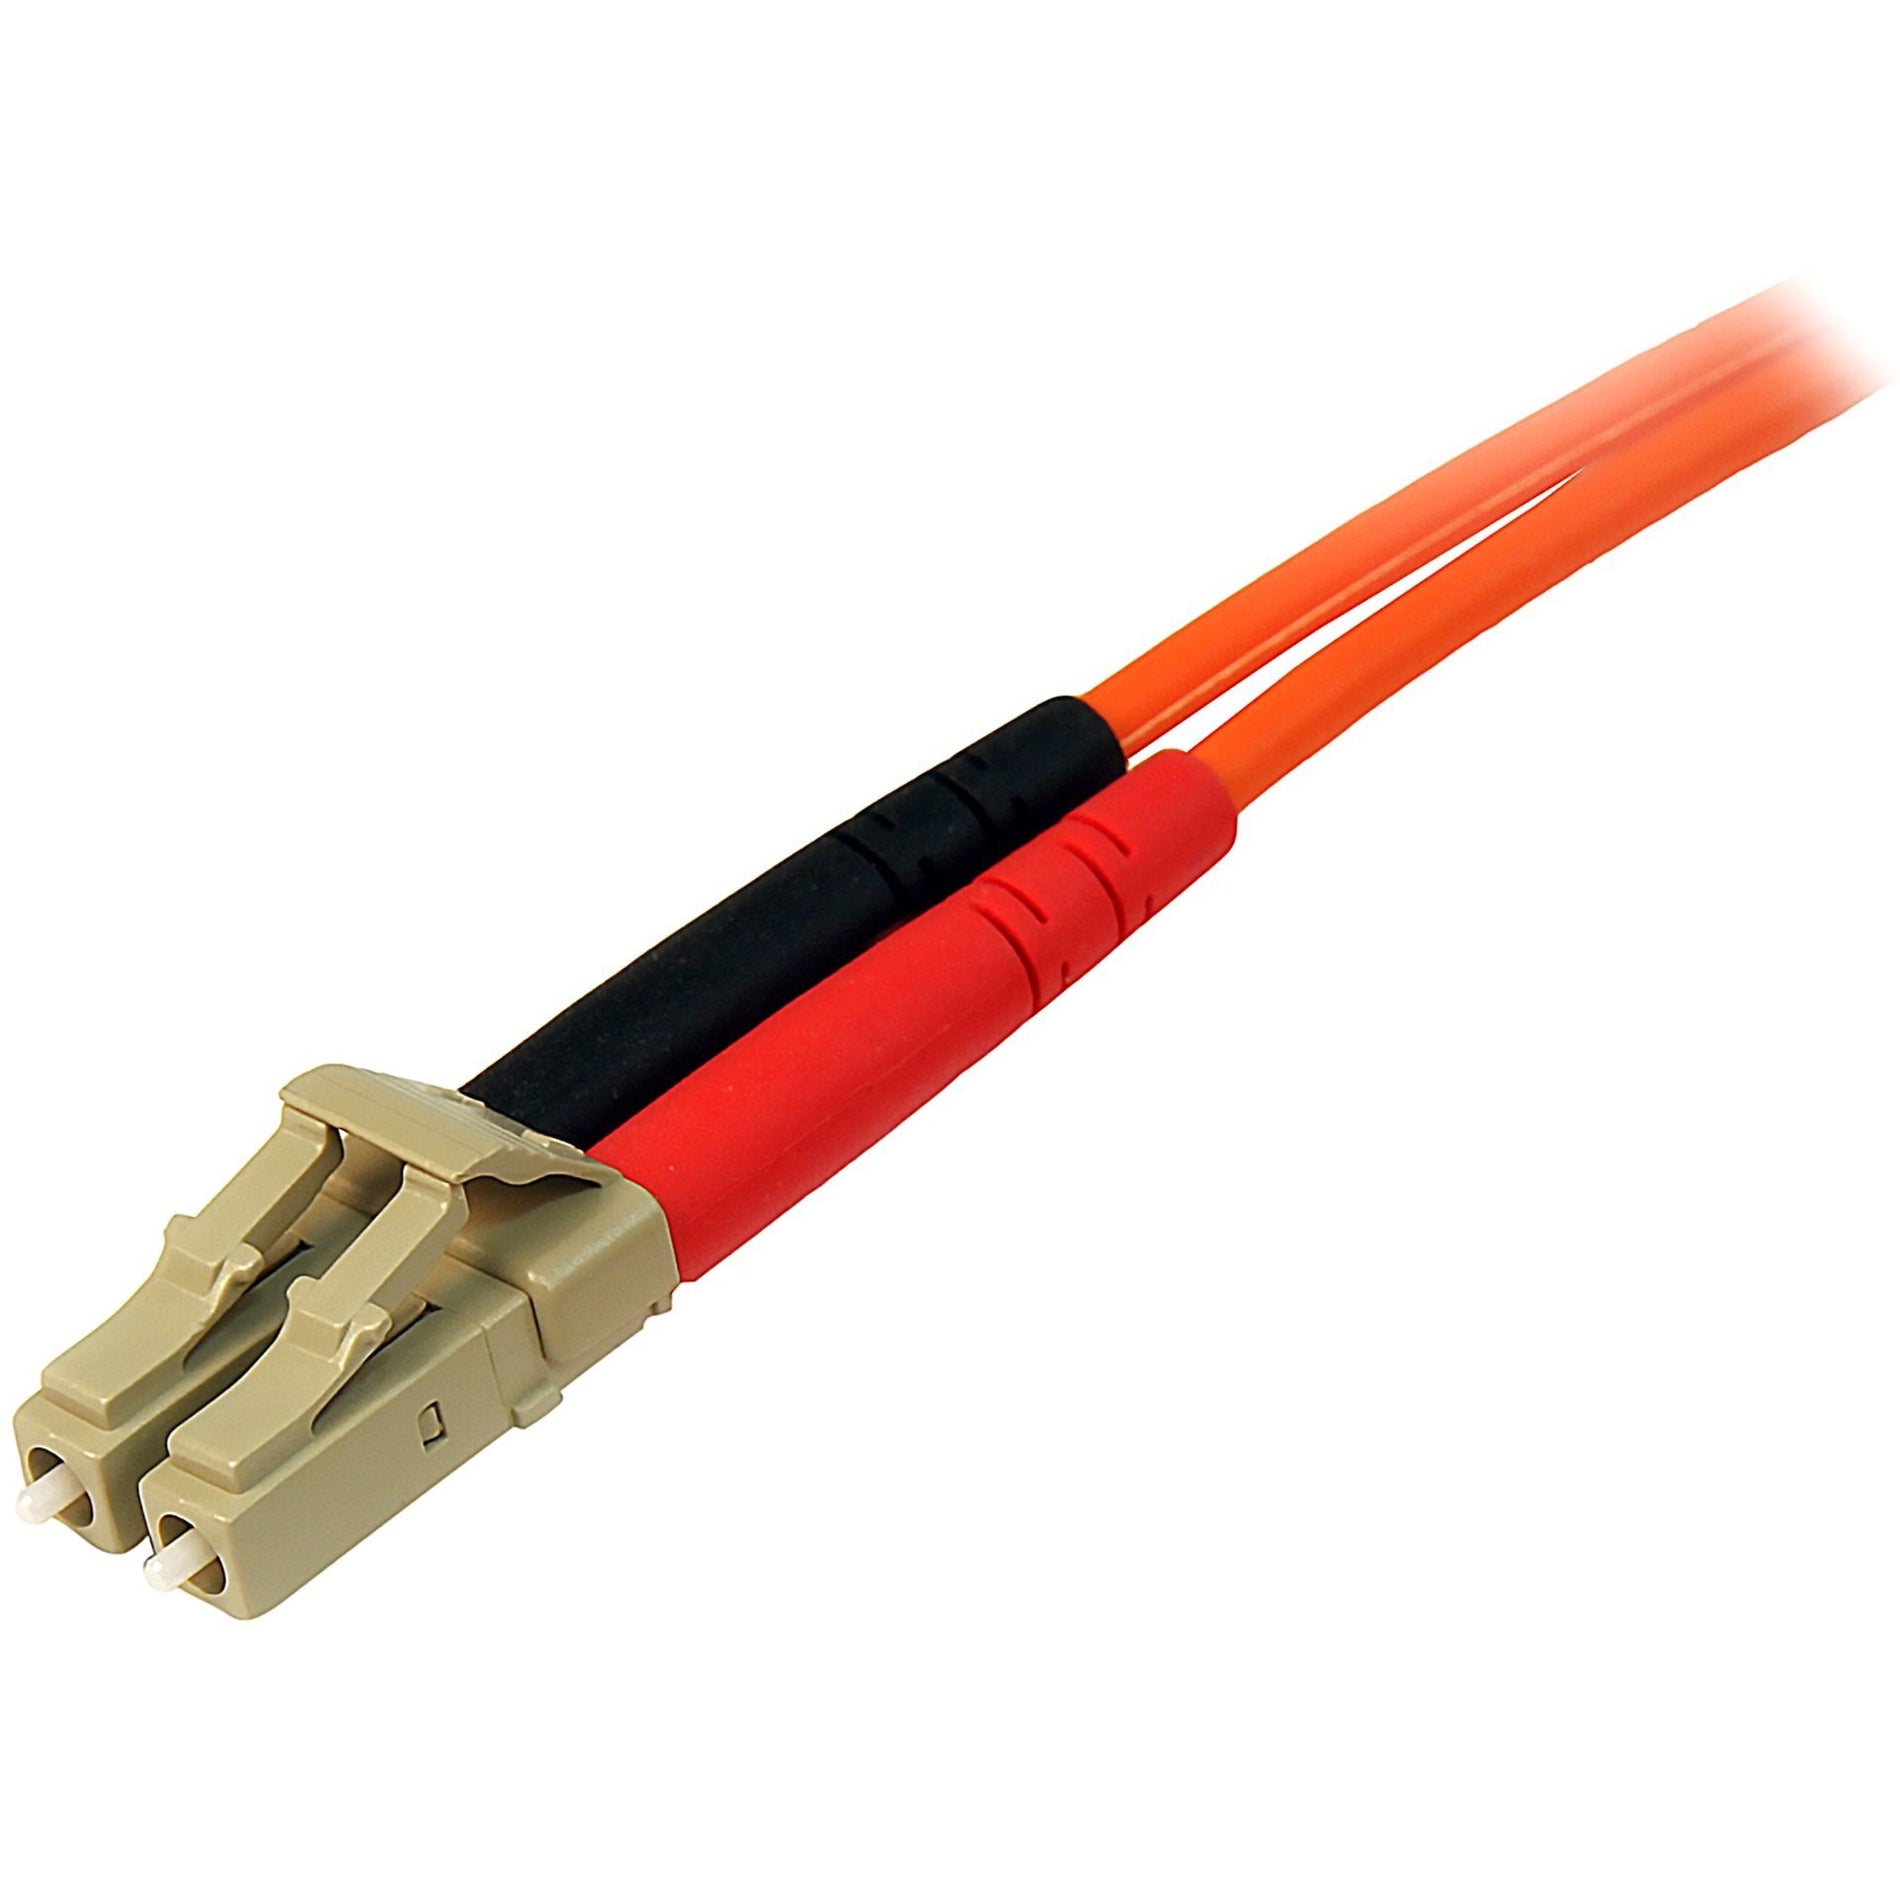 StarTech.com 50FIBLCLC10 10m Multimode 50/125 Duplex Fiber Patch Cable LC - LC, Immune to electric interference, Greater durability during cable installation and maintenance, RoHS Certified